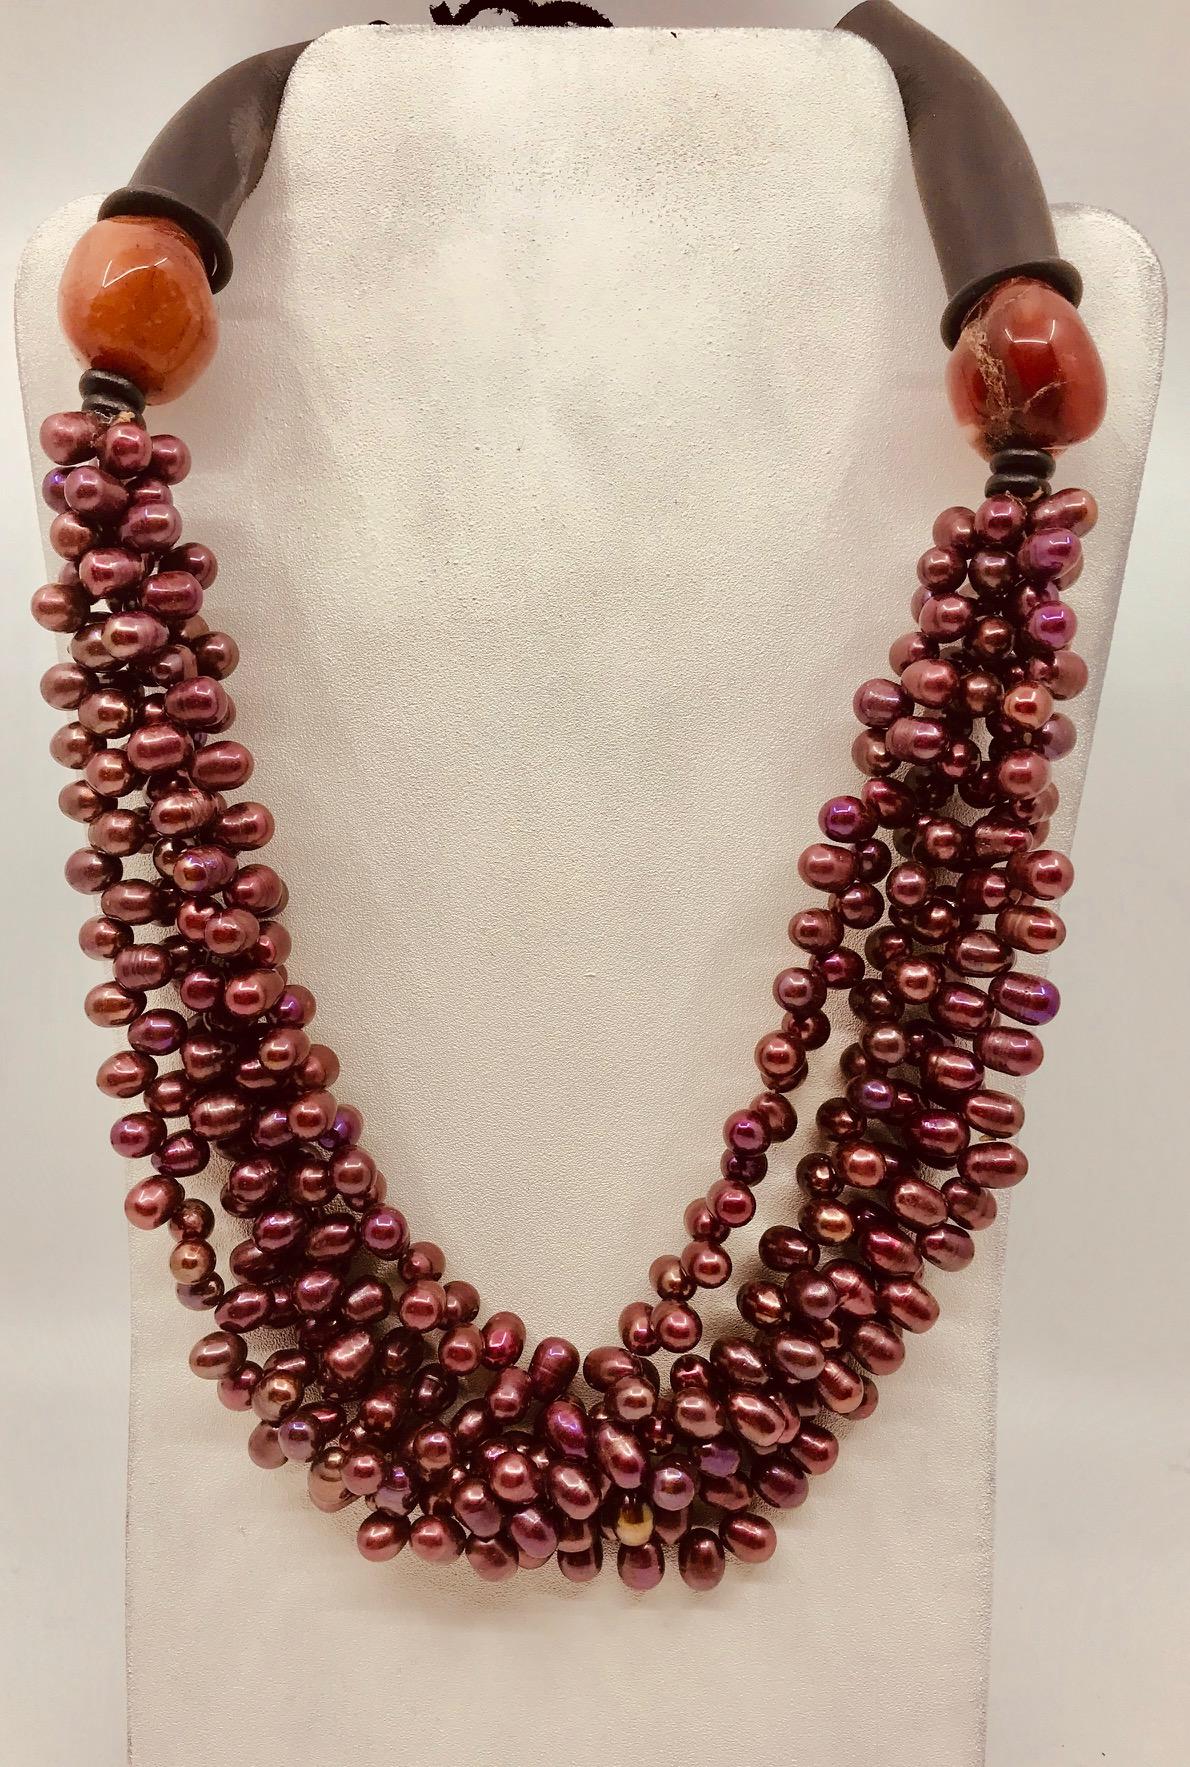 Burgundy color 4 strand Pearl Necklace is enhanced by large Carnelian beads and finished with rubber tubes for comfort.	
 Pearls are the only gems created by an oyster – a living organism. Today, most pearls are grown on aquaculture farms. The white